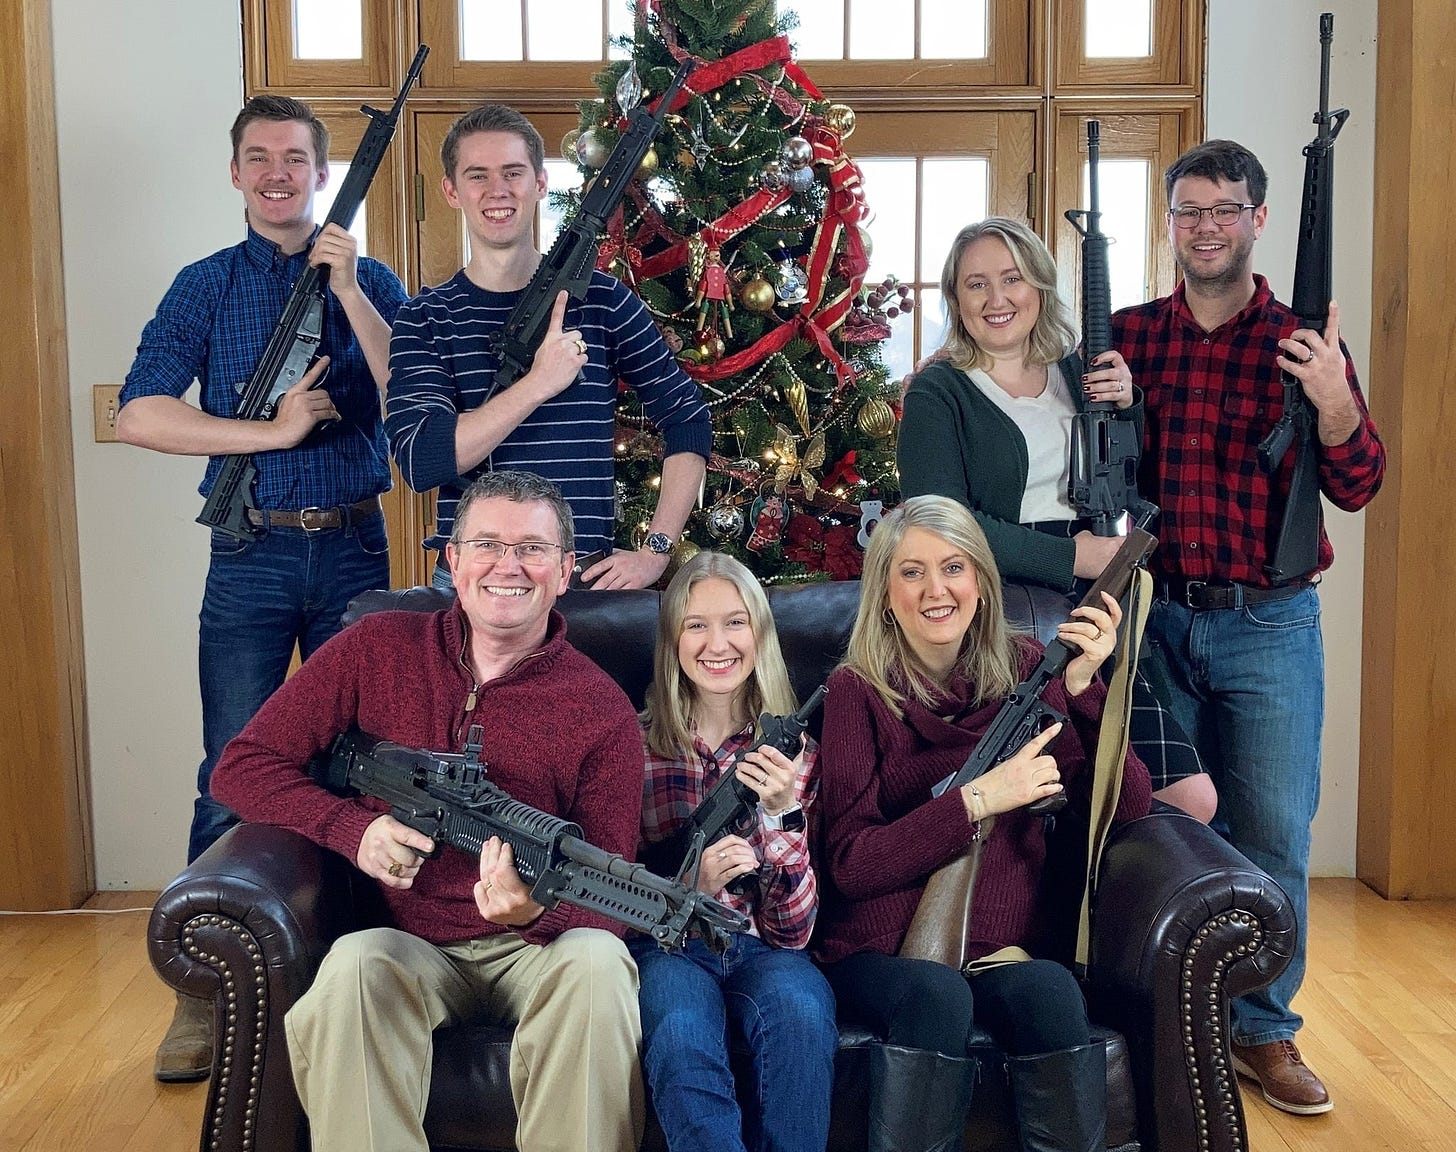 U.S. congressman posts family Christmas picture with guns ...